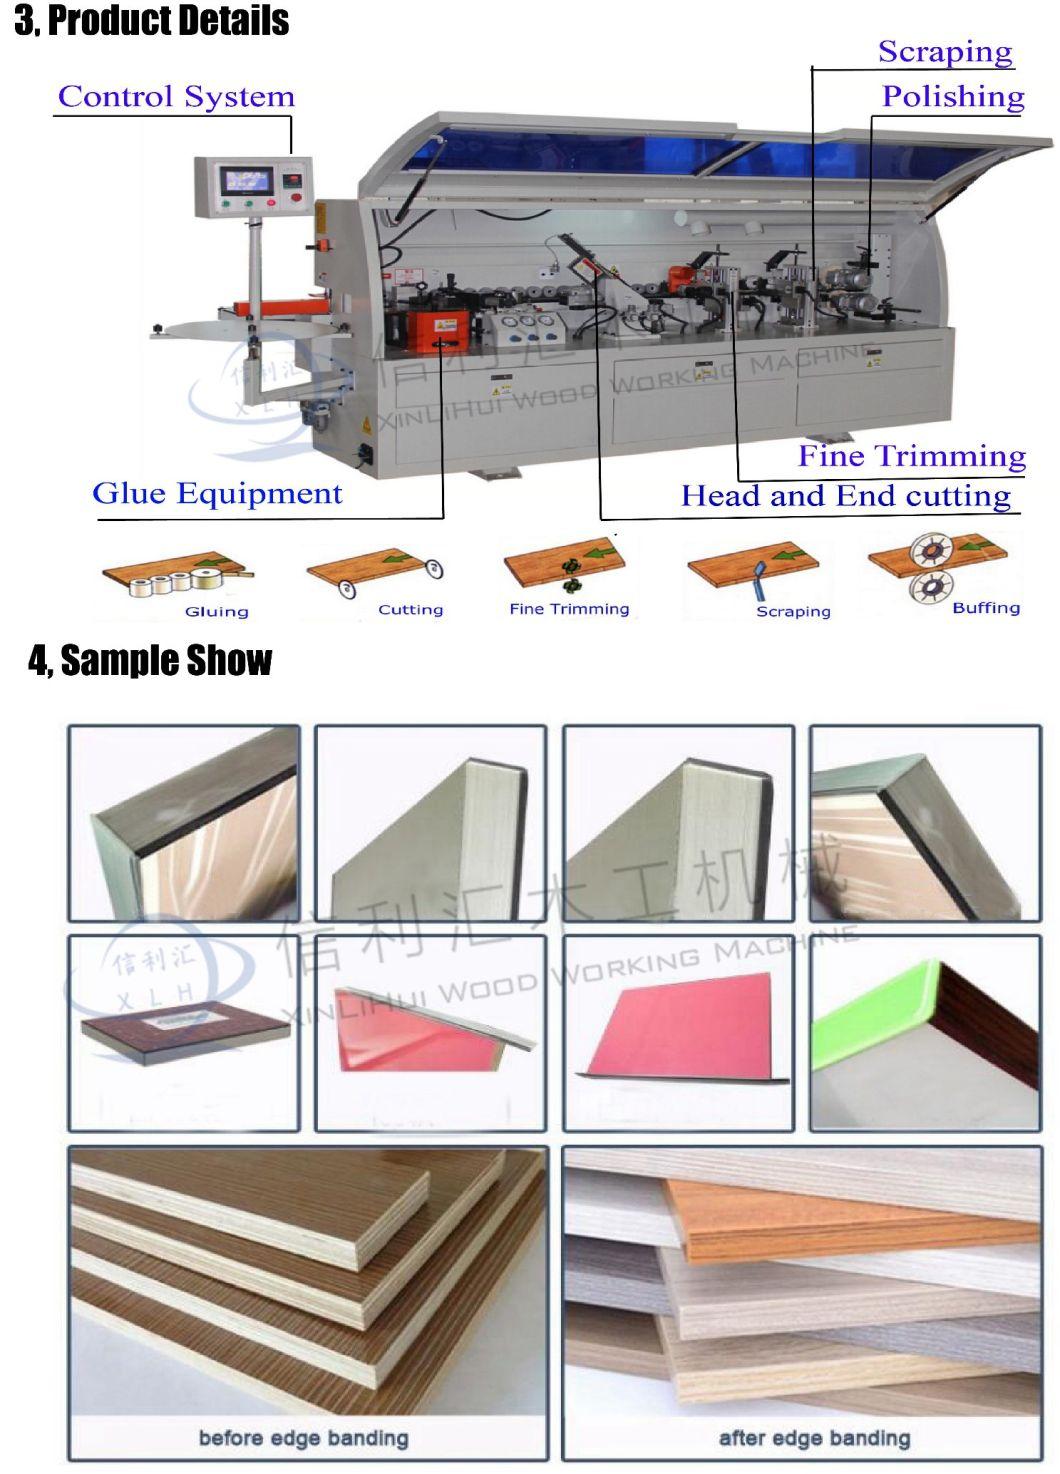 China Manufacturer CNC Wood Router Manual Wood Edge Banding Machine/ Cabinet Edge Bander Machine with End Corner Rounding Sealing Small Compact Auto Edge Bander